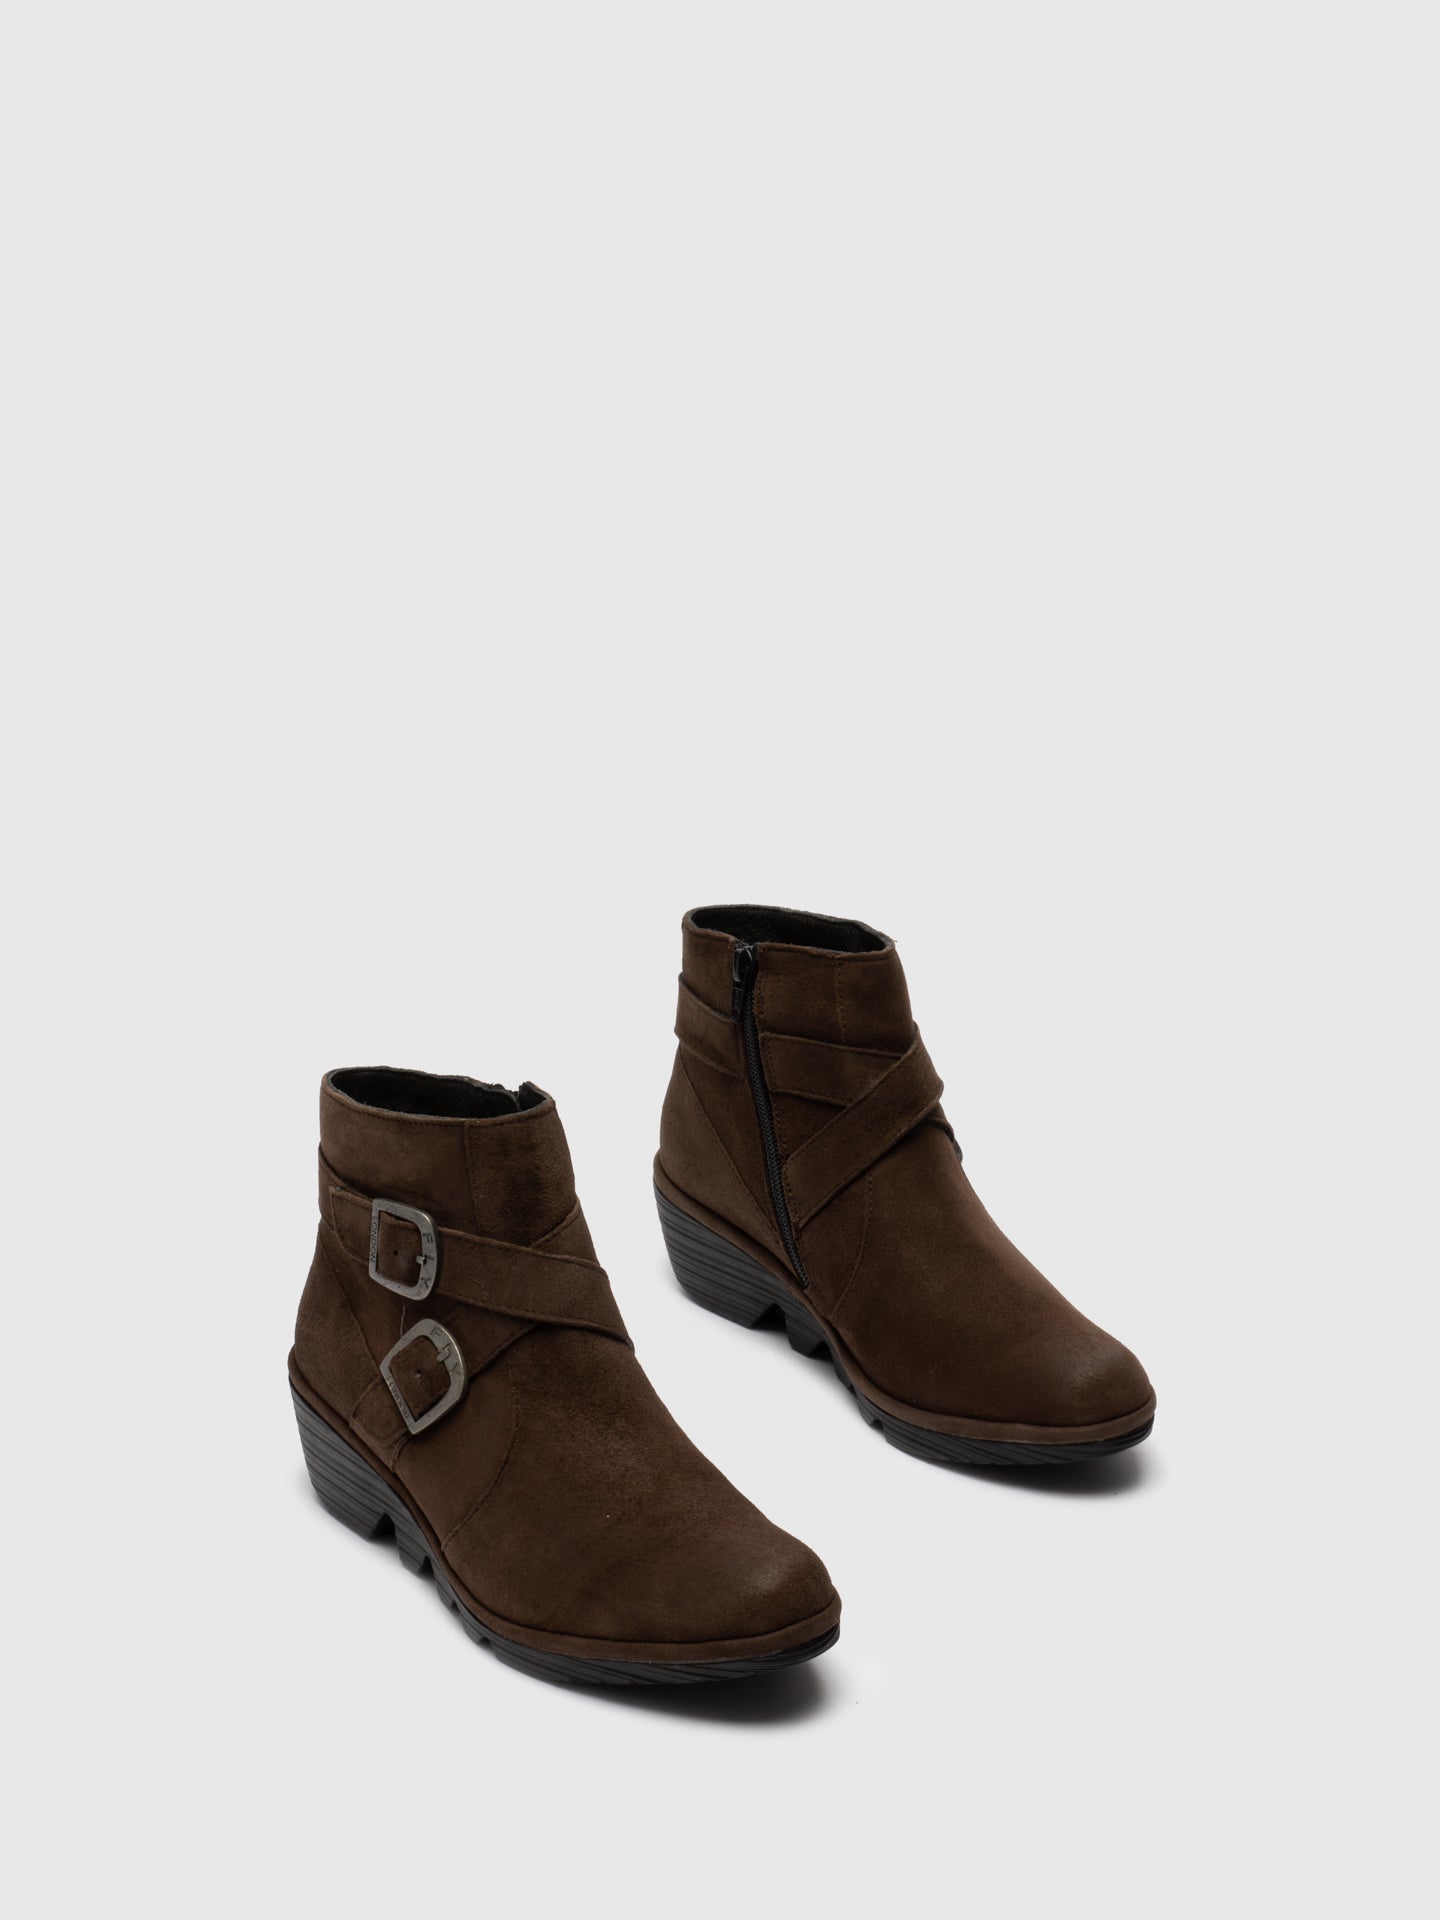 Fly London Sienna Buckle Ankle Boots